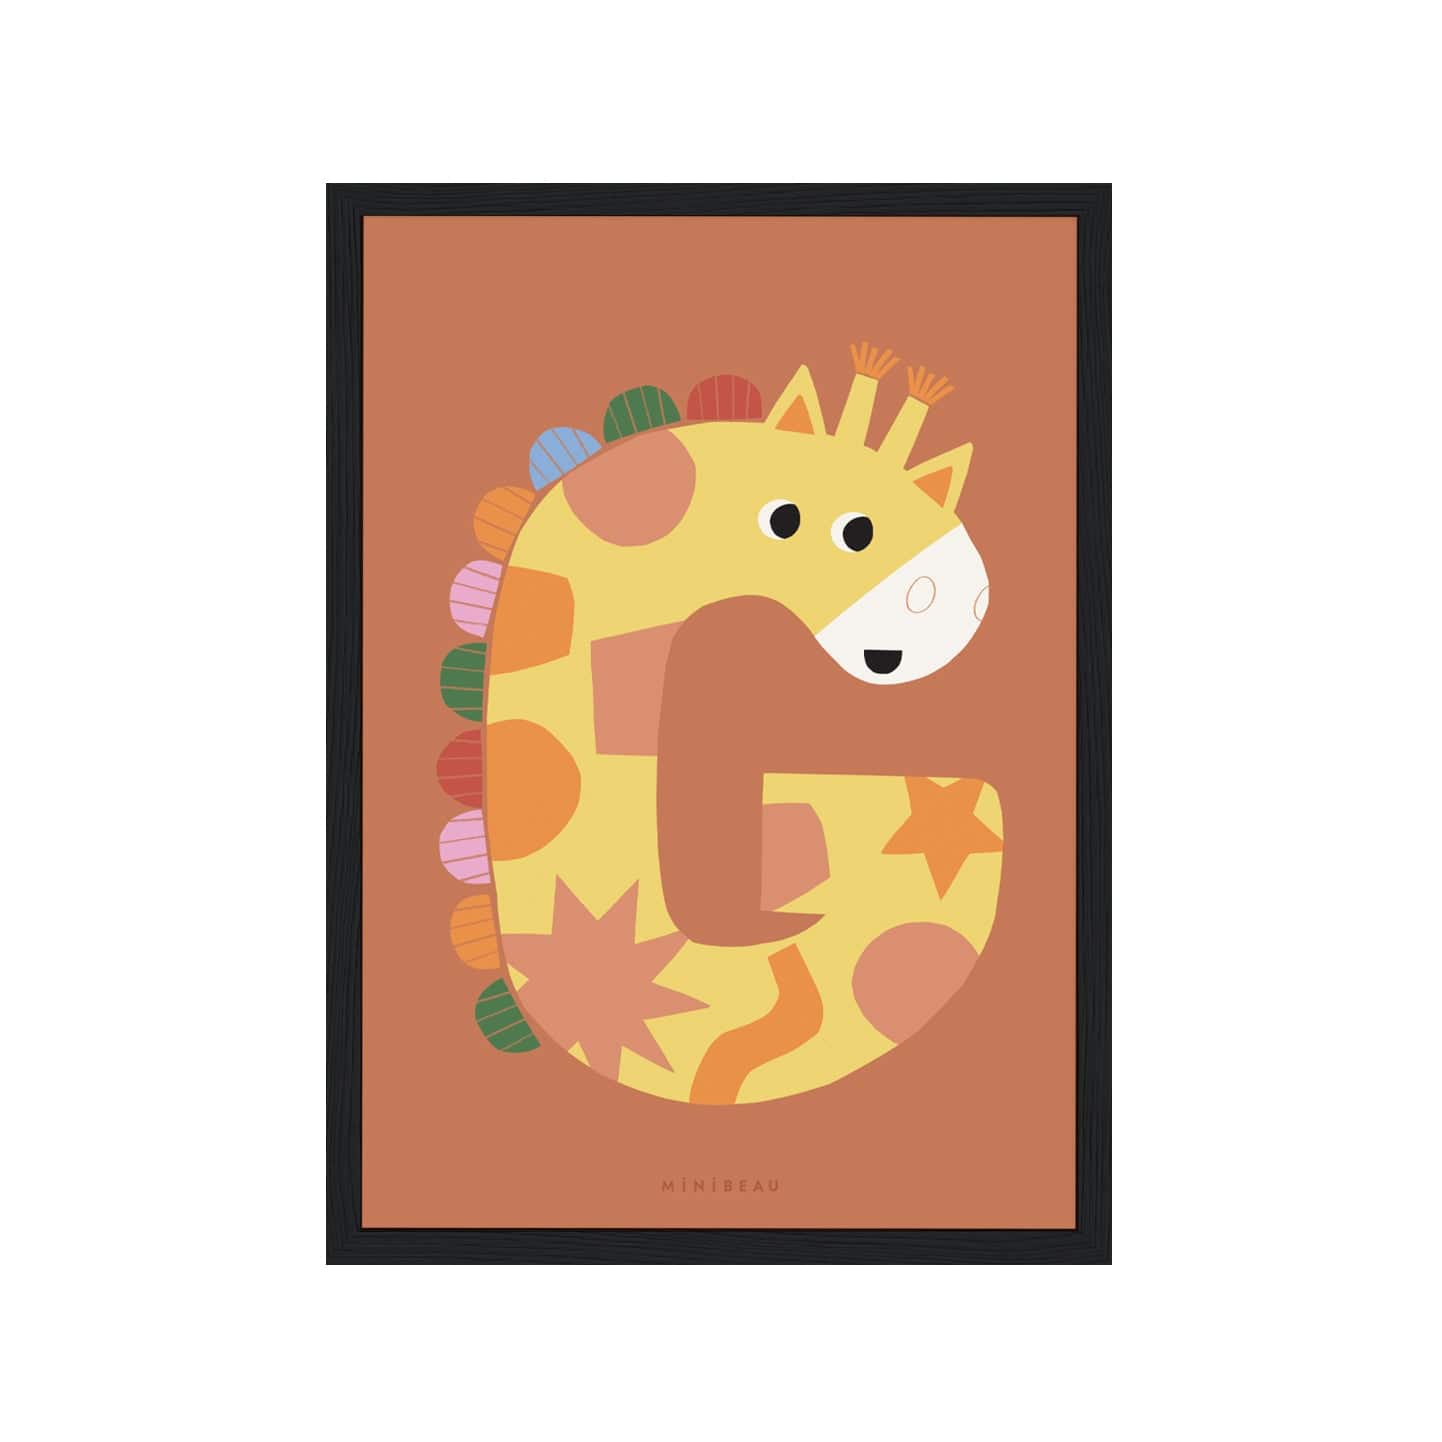 Art print on a black frame. Our Happy Alphabet 'G' Art Print shows a smiling giraffe in the shape of a G with a rainbow coloured mane on an orange/rust background.